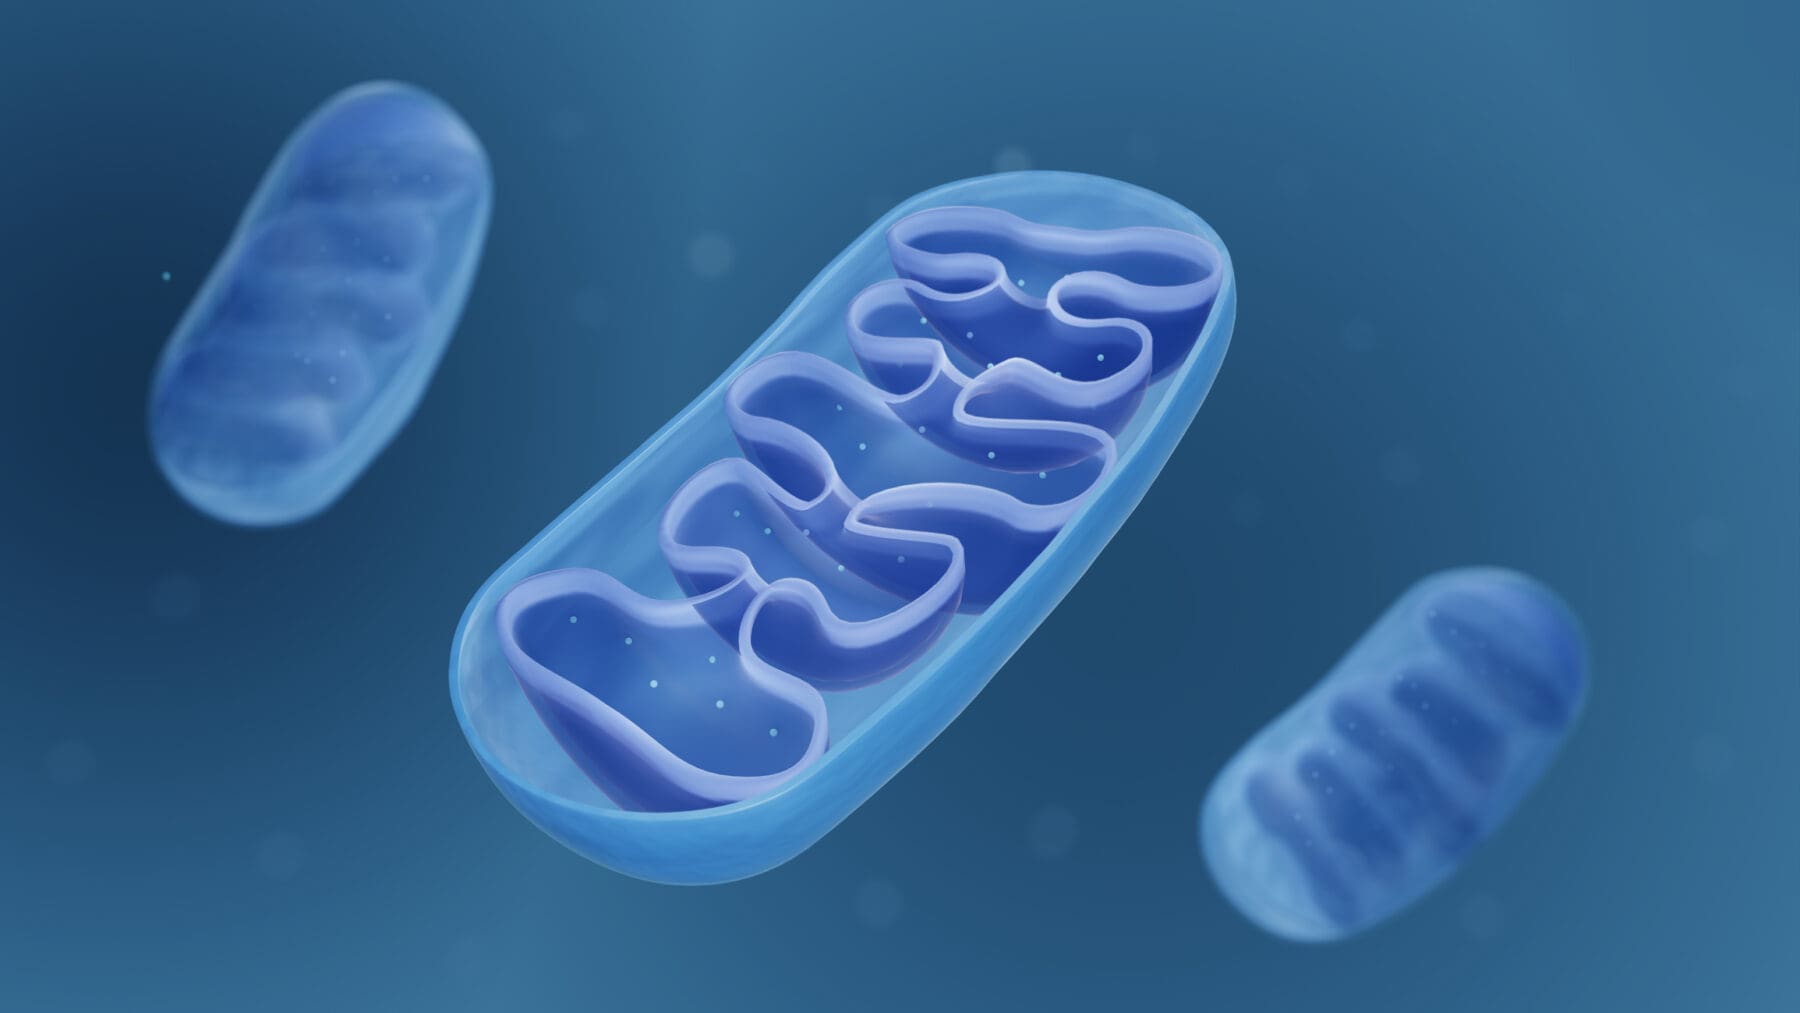 Cross-section of mitochondria showing their structure